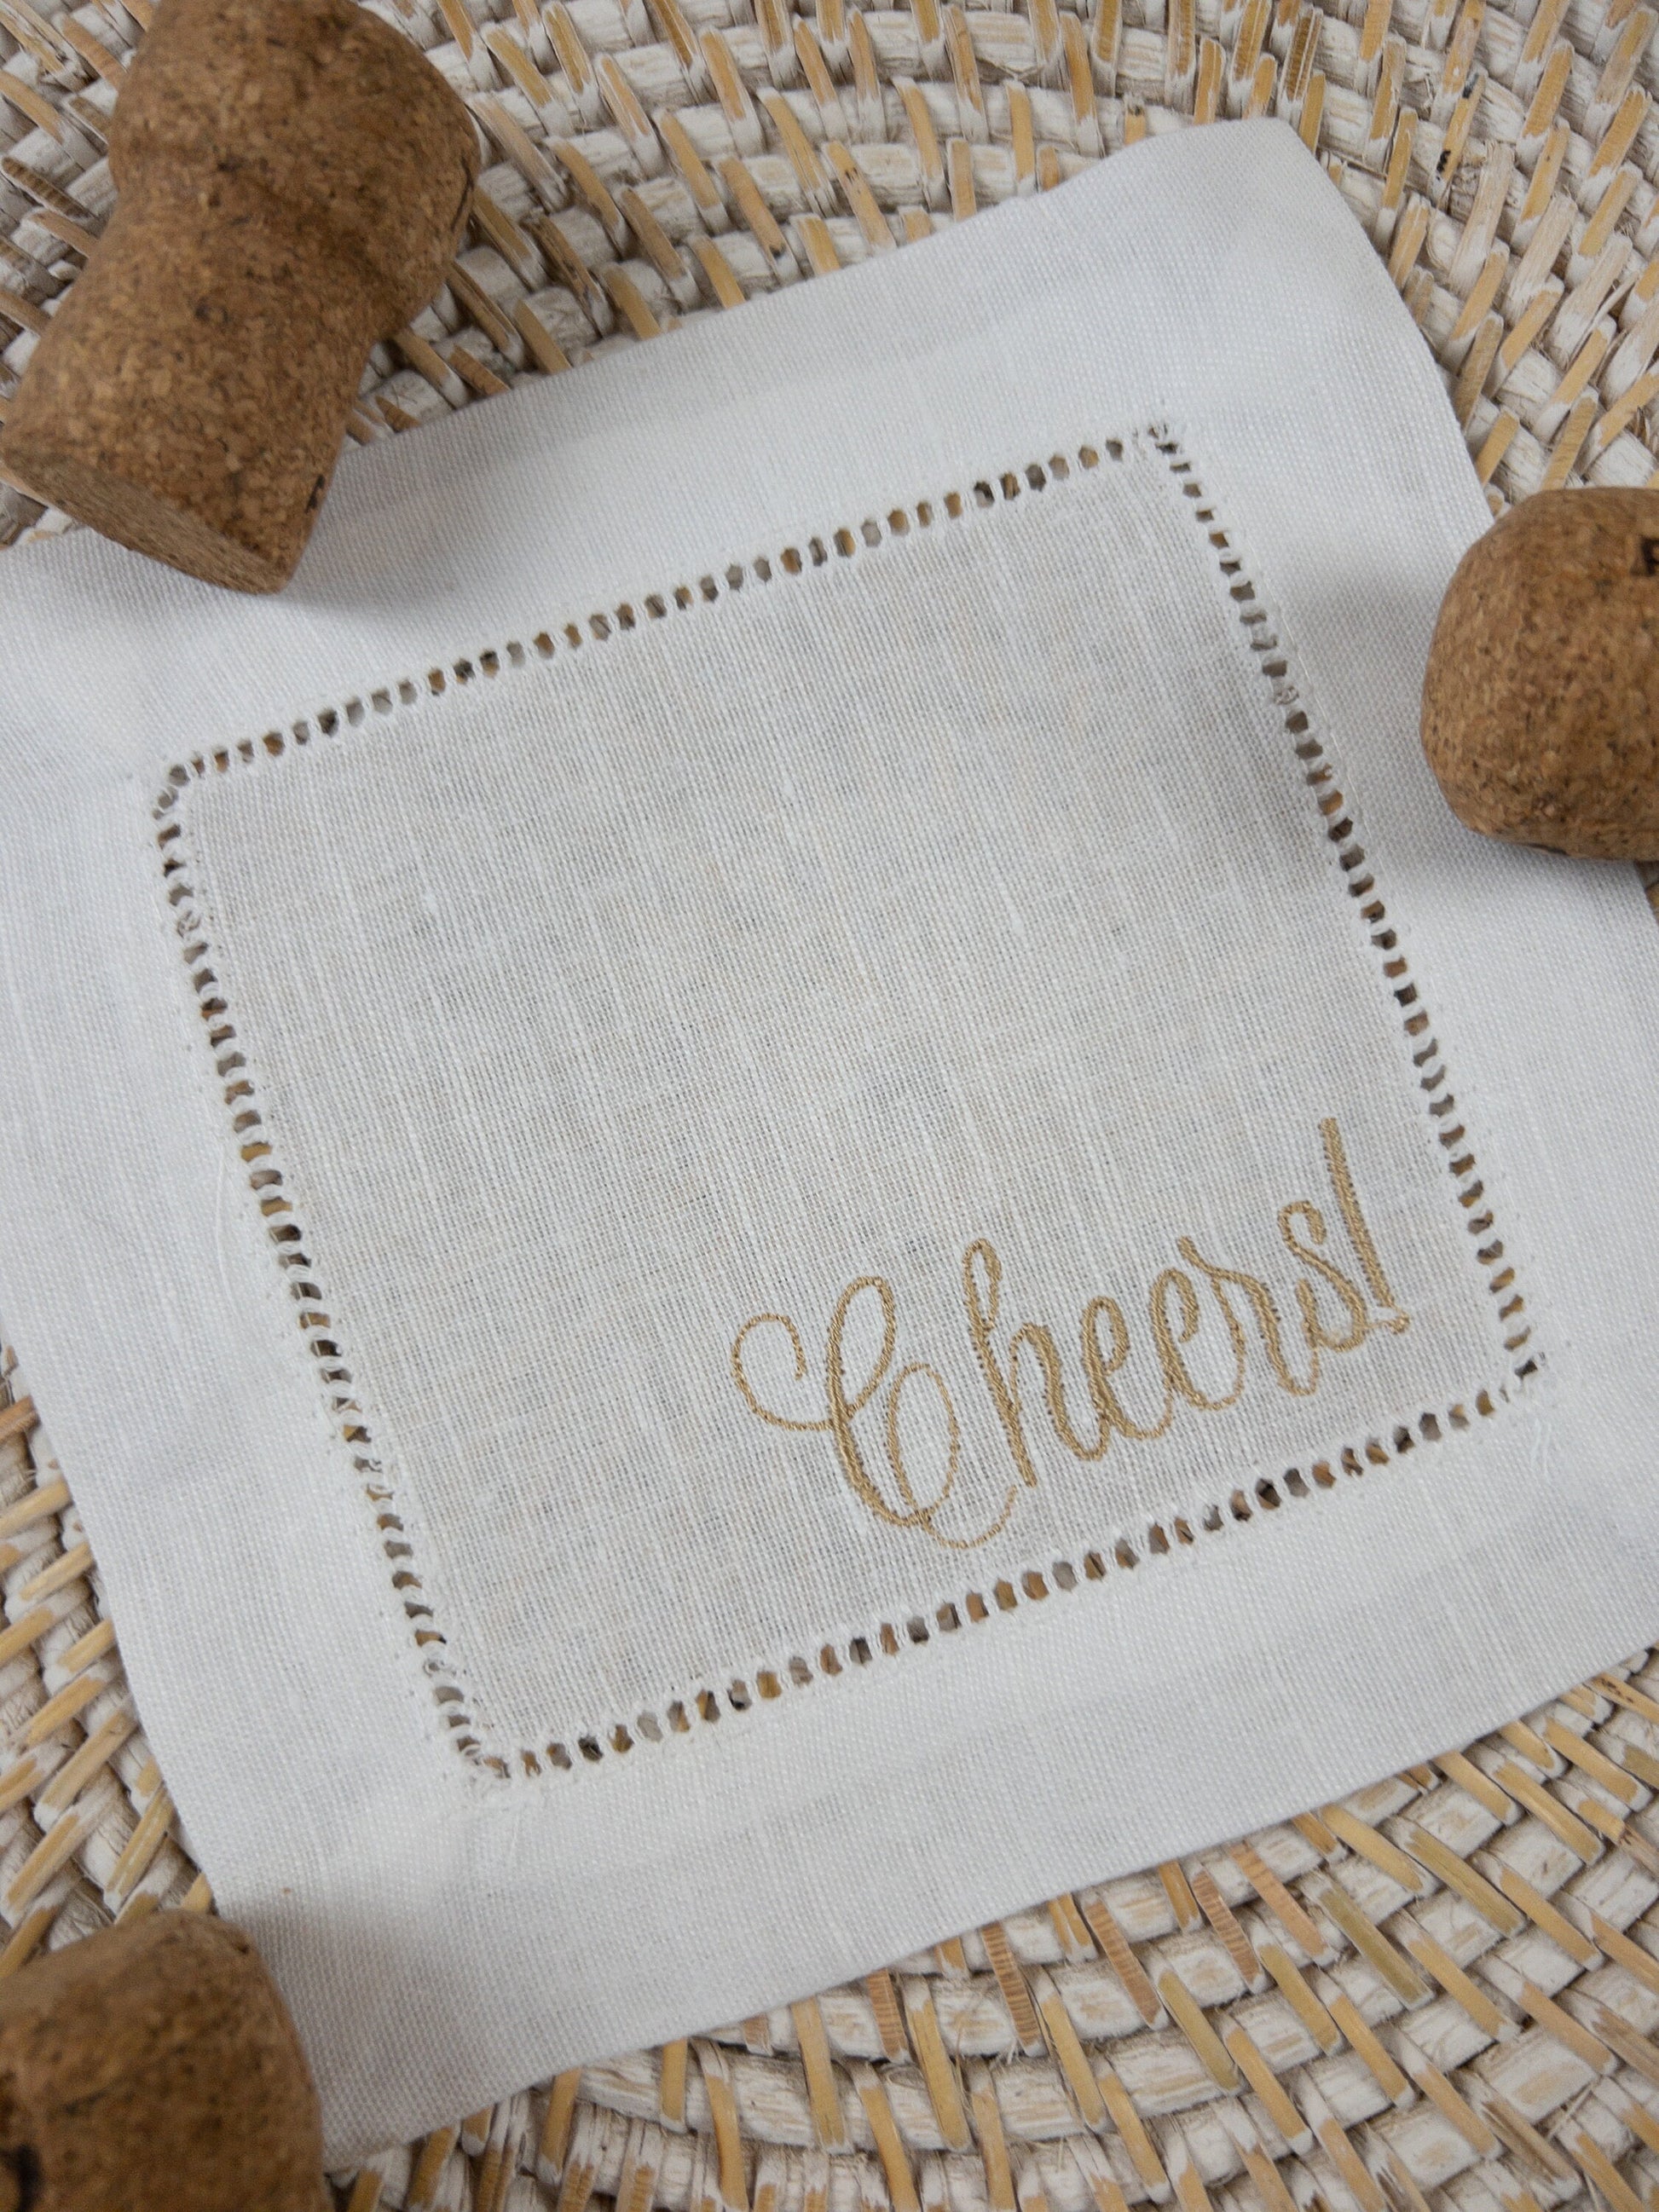 White Linen Cocktail Napkin embroidered with Cheers!